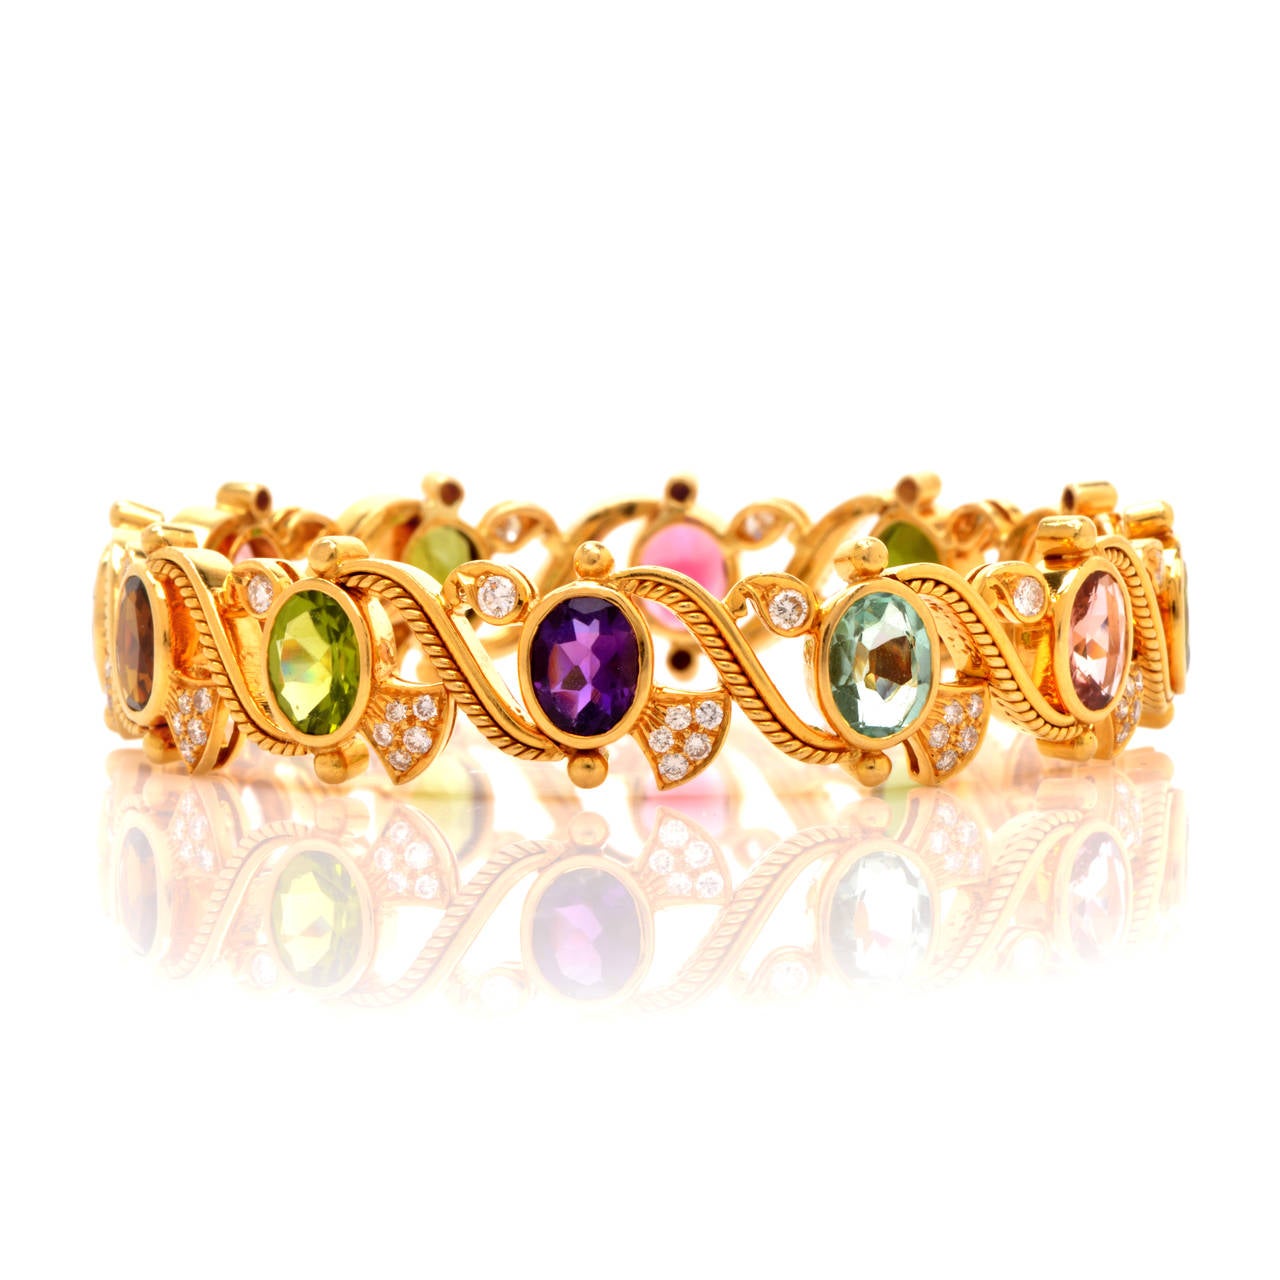 This exquisite multi-gem bangle bracelet of artistic design and immaculate artisanship is handcrafted in solid 18K yellow gold, weighing approx. 54.3 grams and measuring 7.5